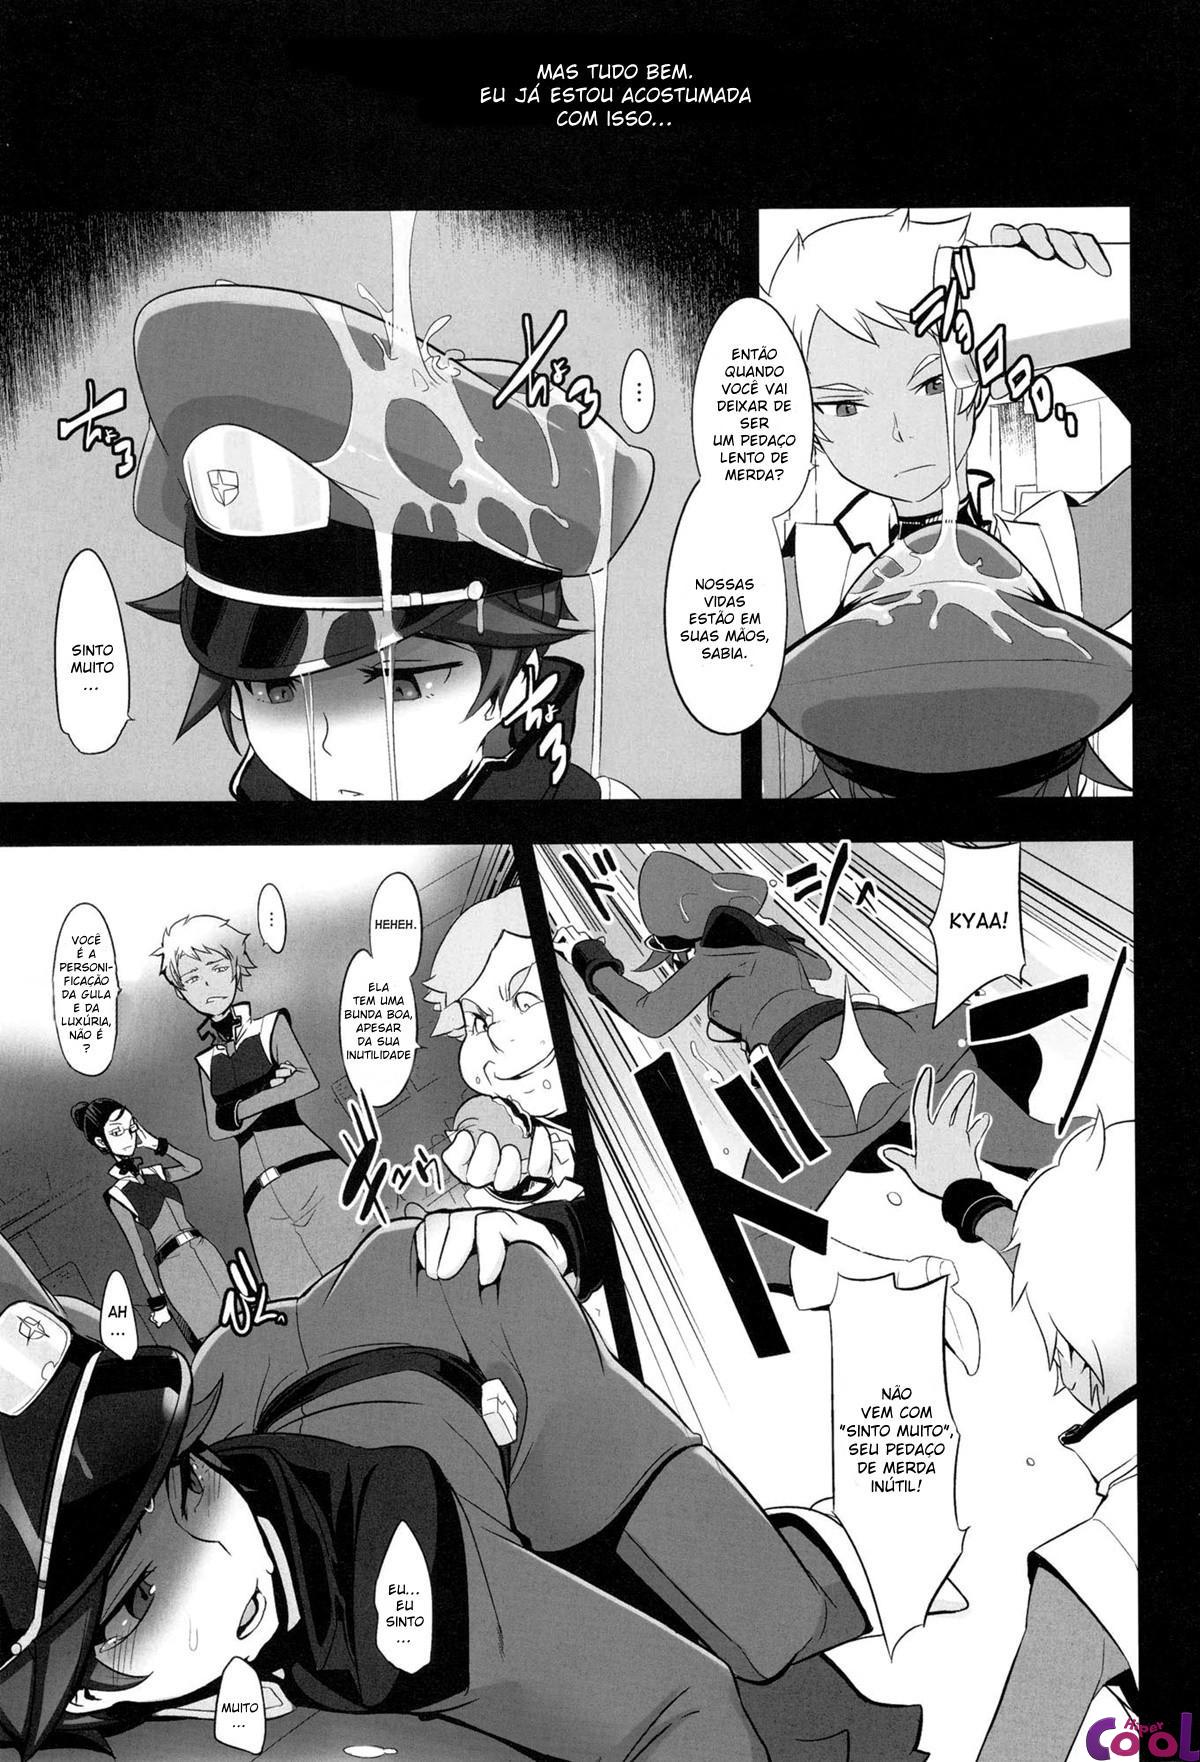 dame-kanchou-or-useless-captain-chapter-01-page-2.jpg